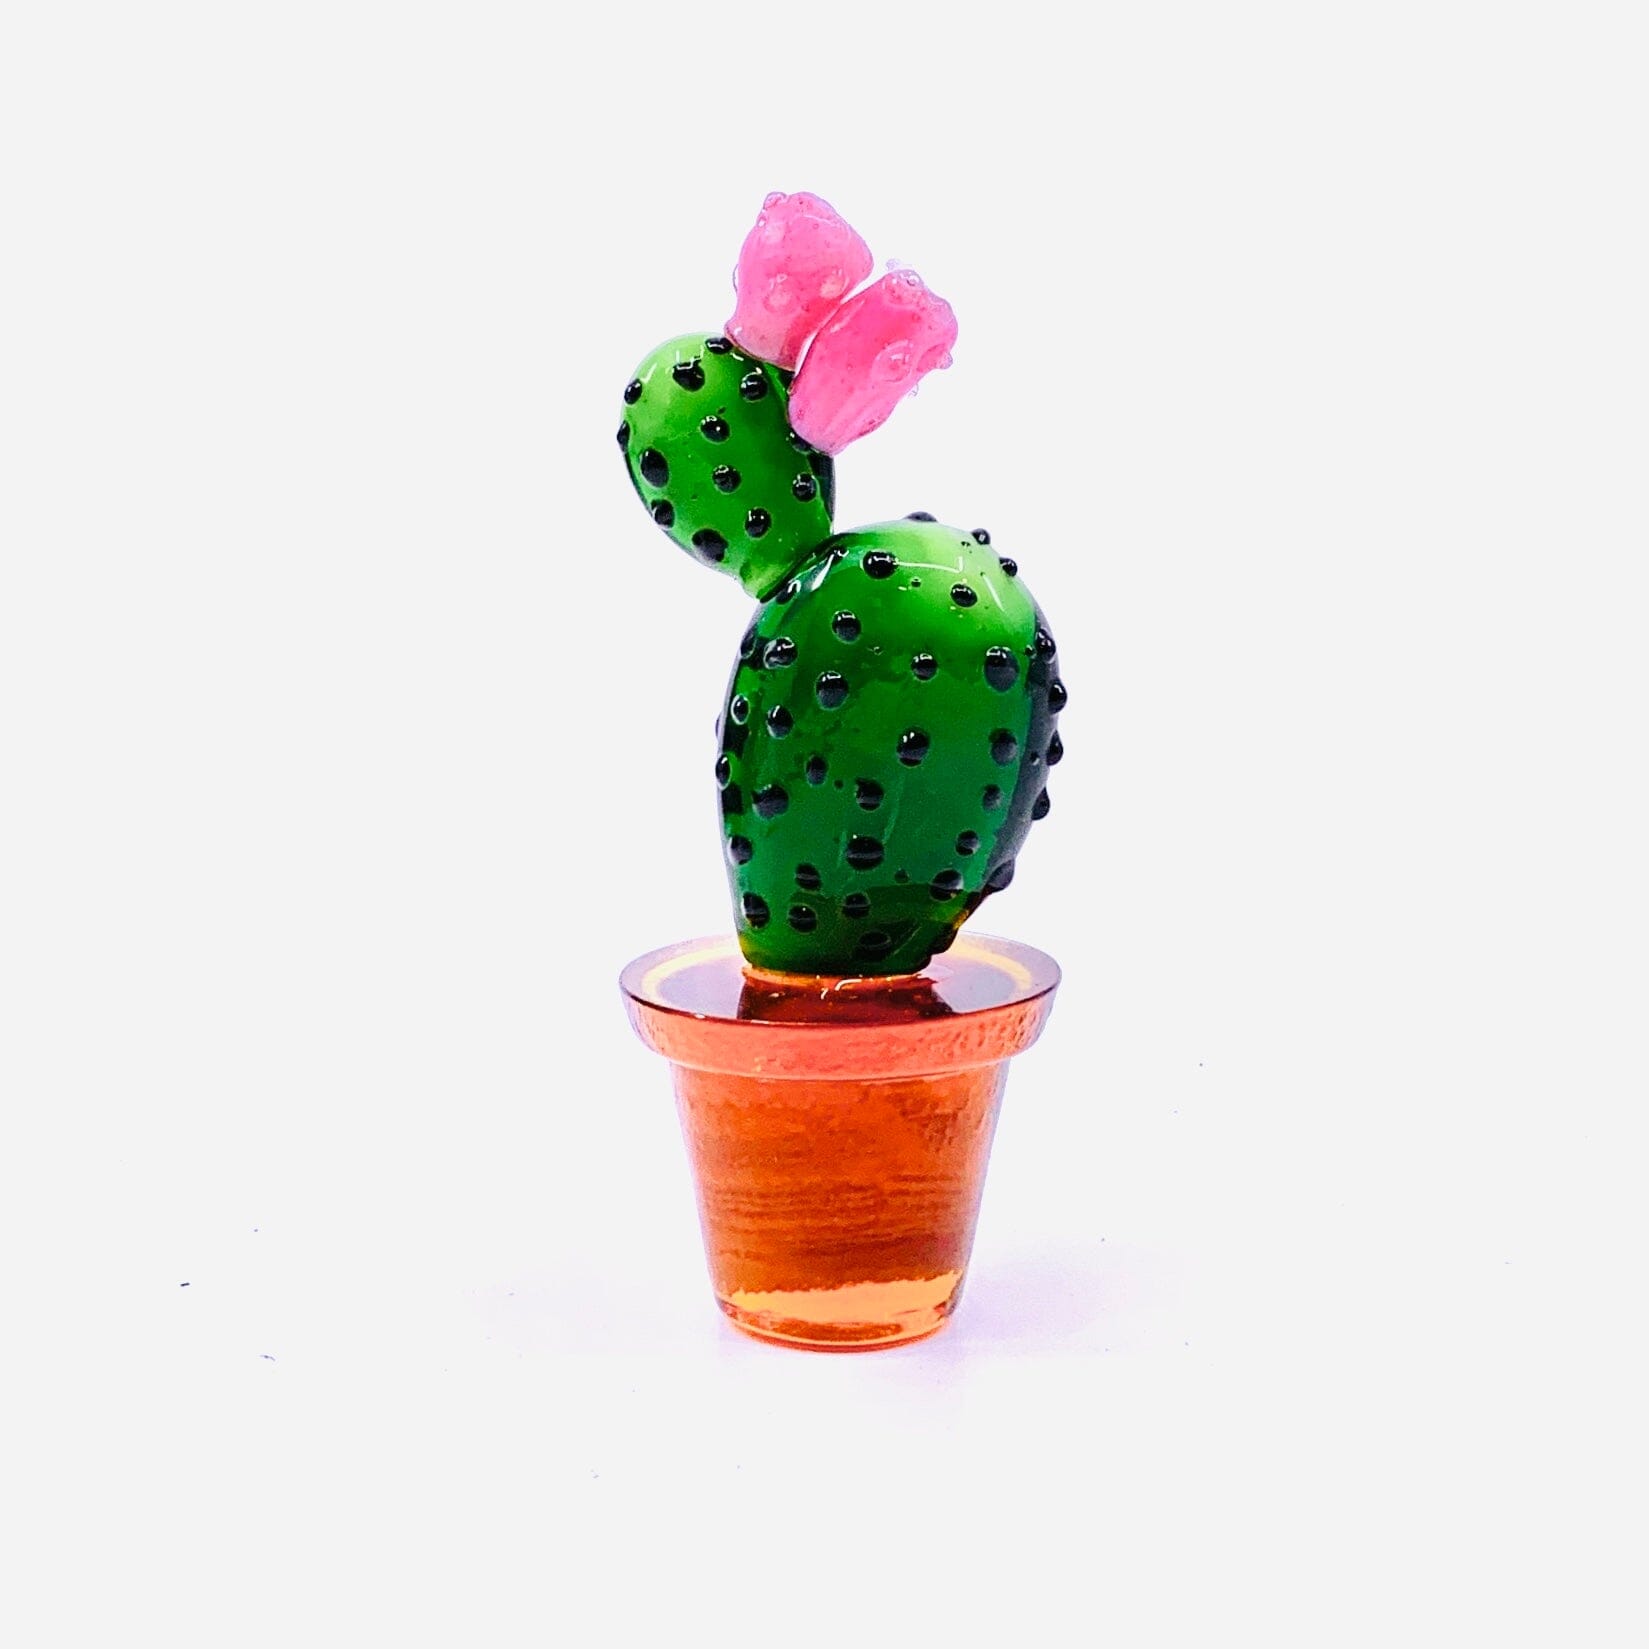 Emotional Support Pocket Cactus, 2 Miniature Dynasty 